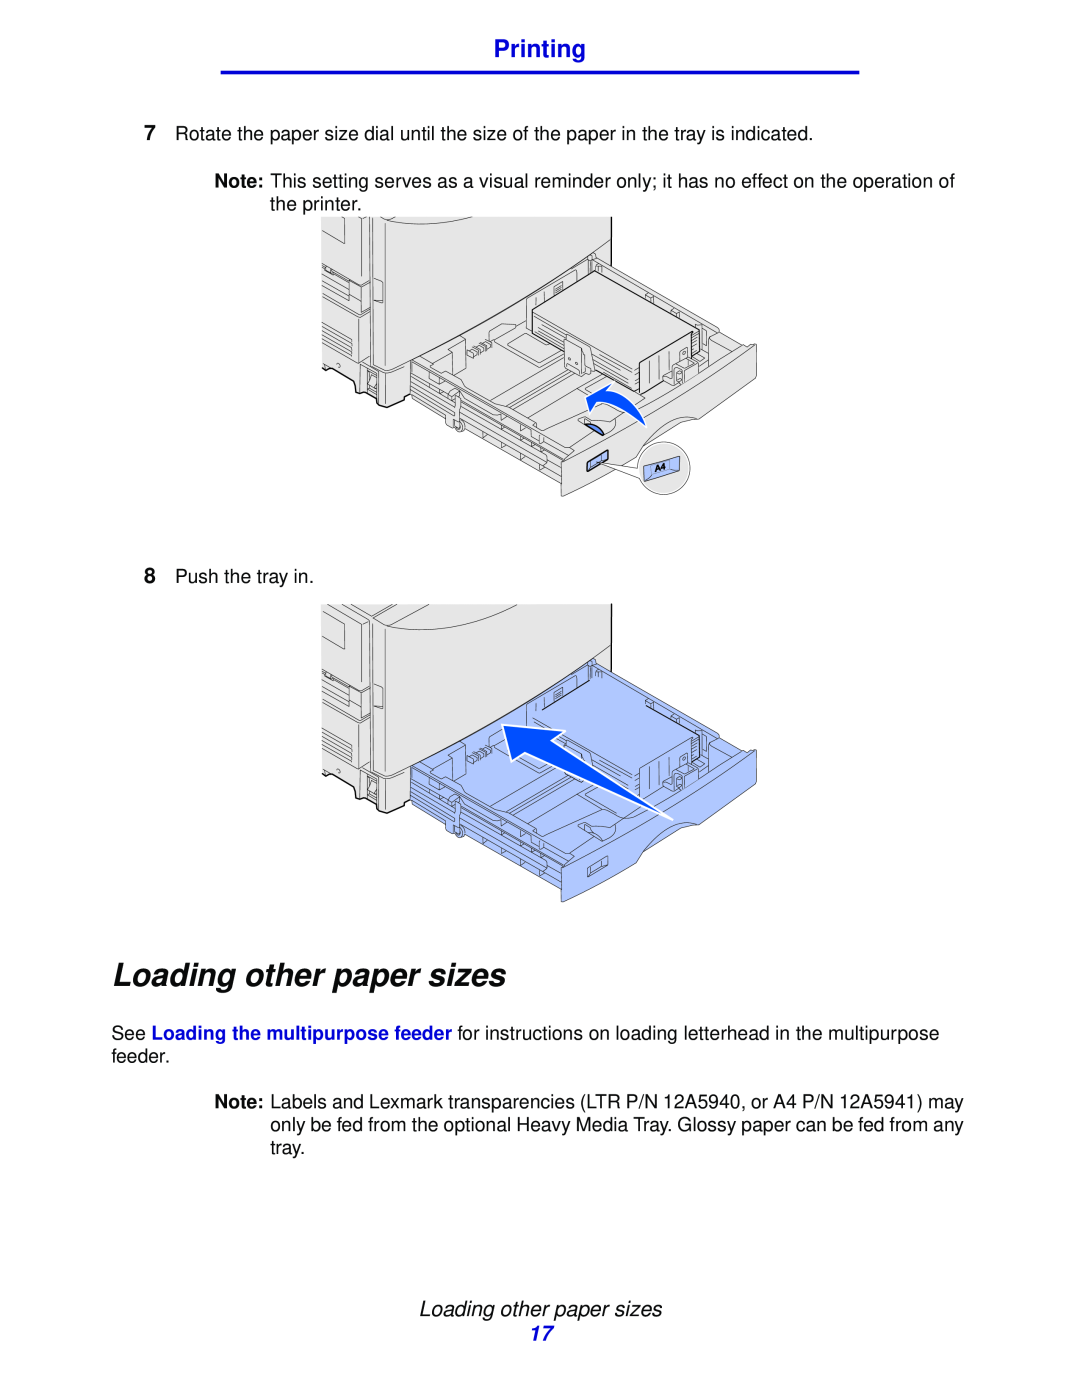 Lexmark 912 manual Loading other paper sizes, Printing 